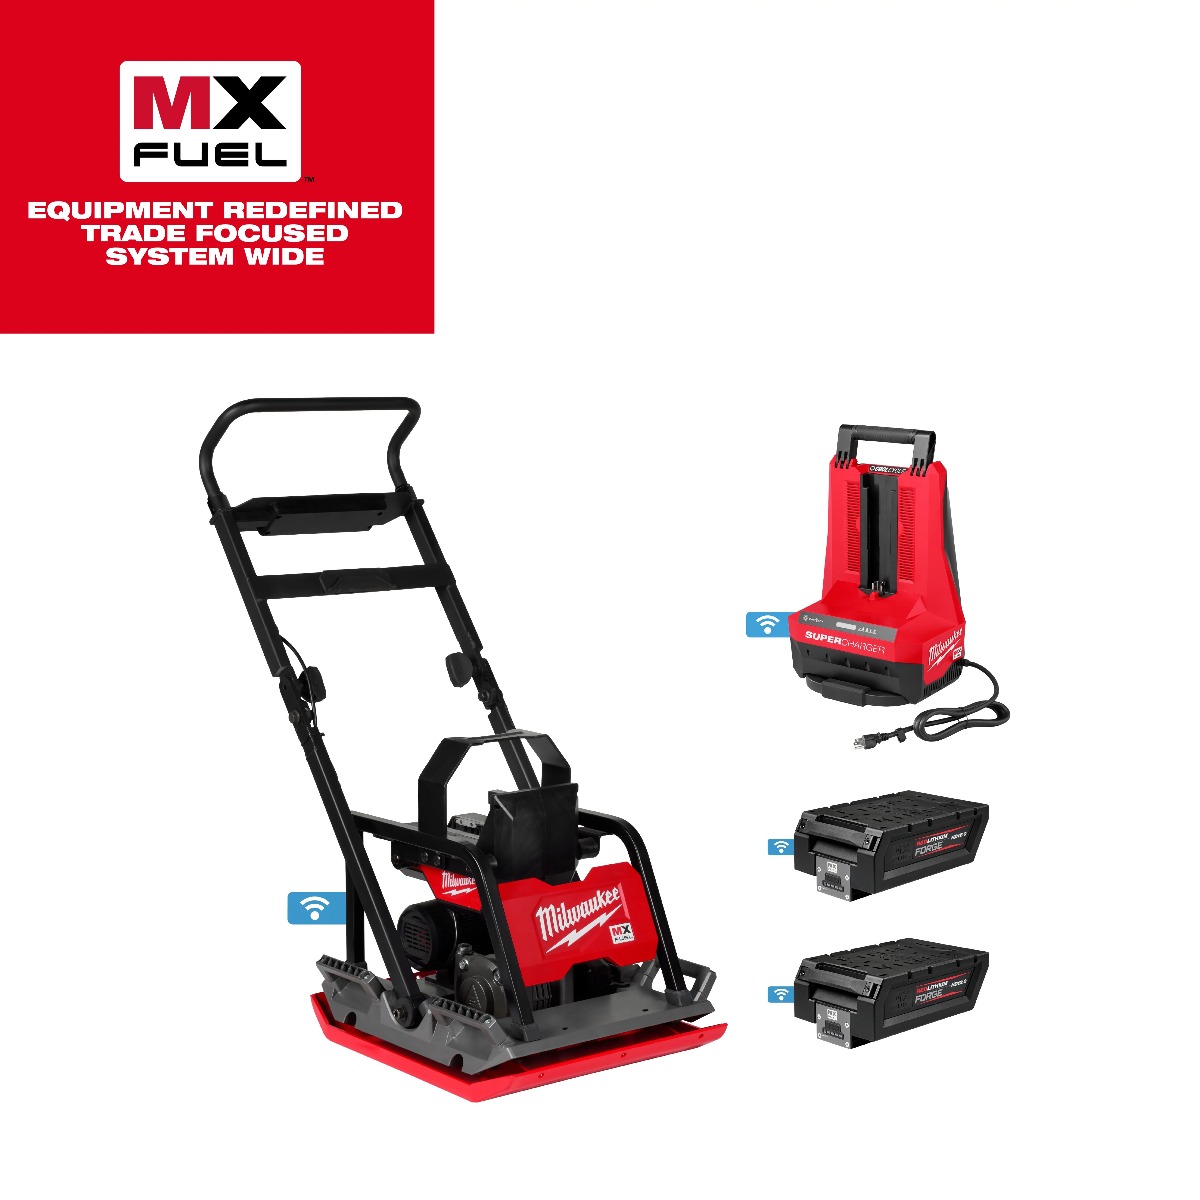 MX FUEL™ 20" Plate Compactor Kit